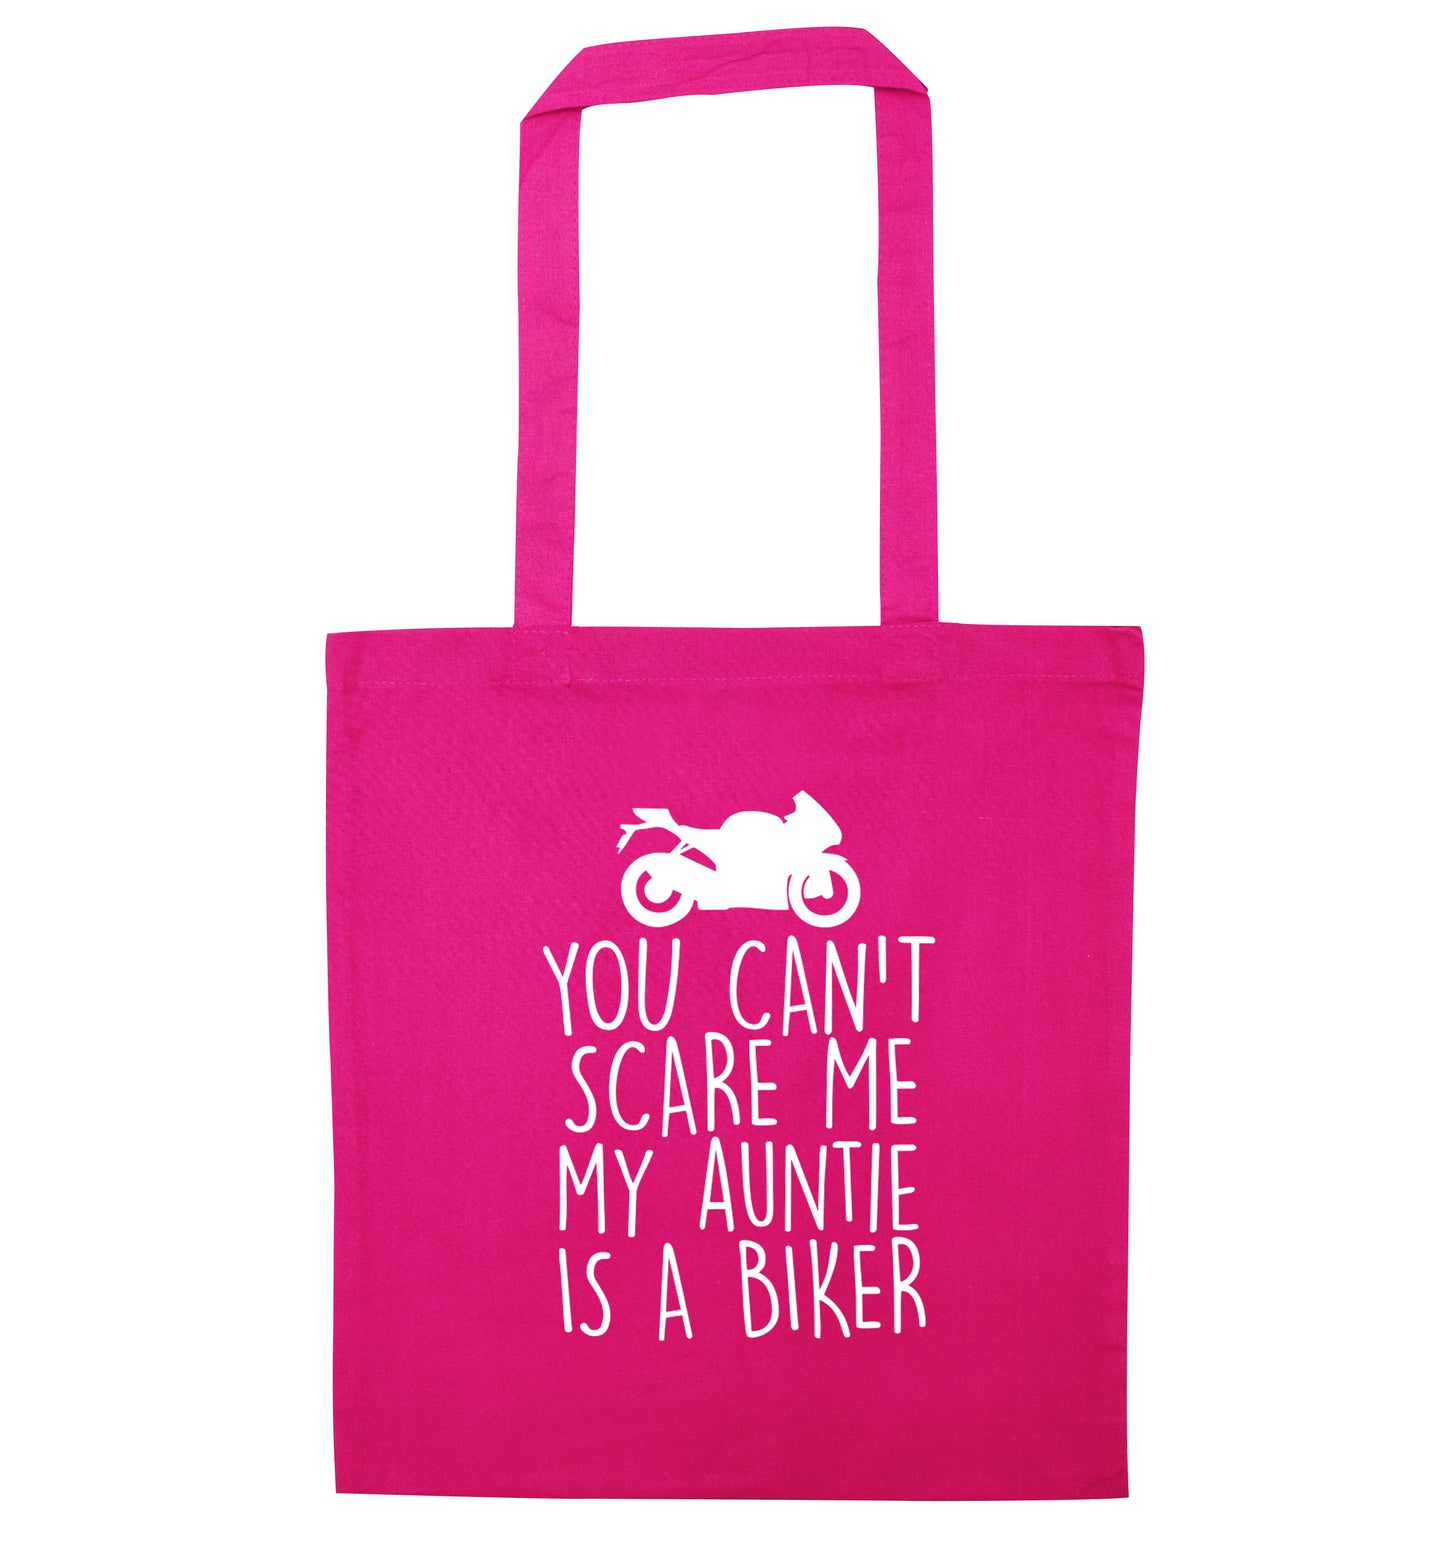 You can't scare me my auntie is a biker pink tote bag